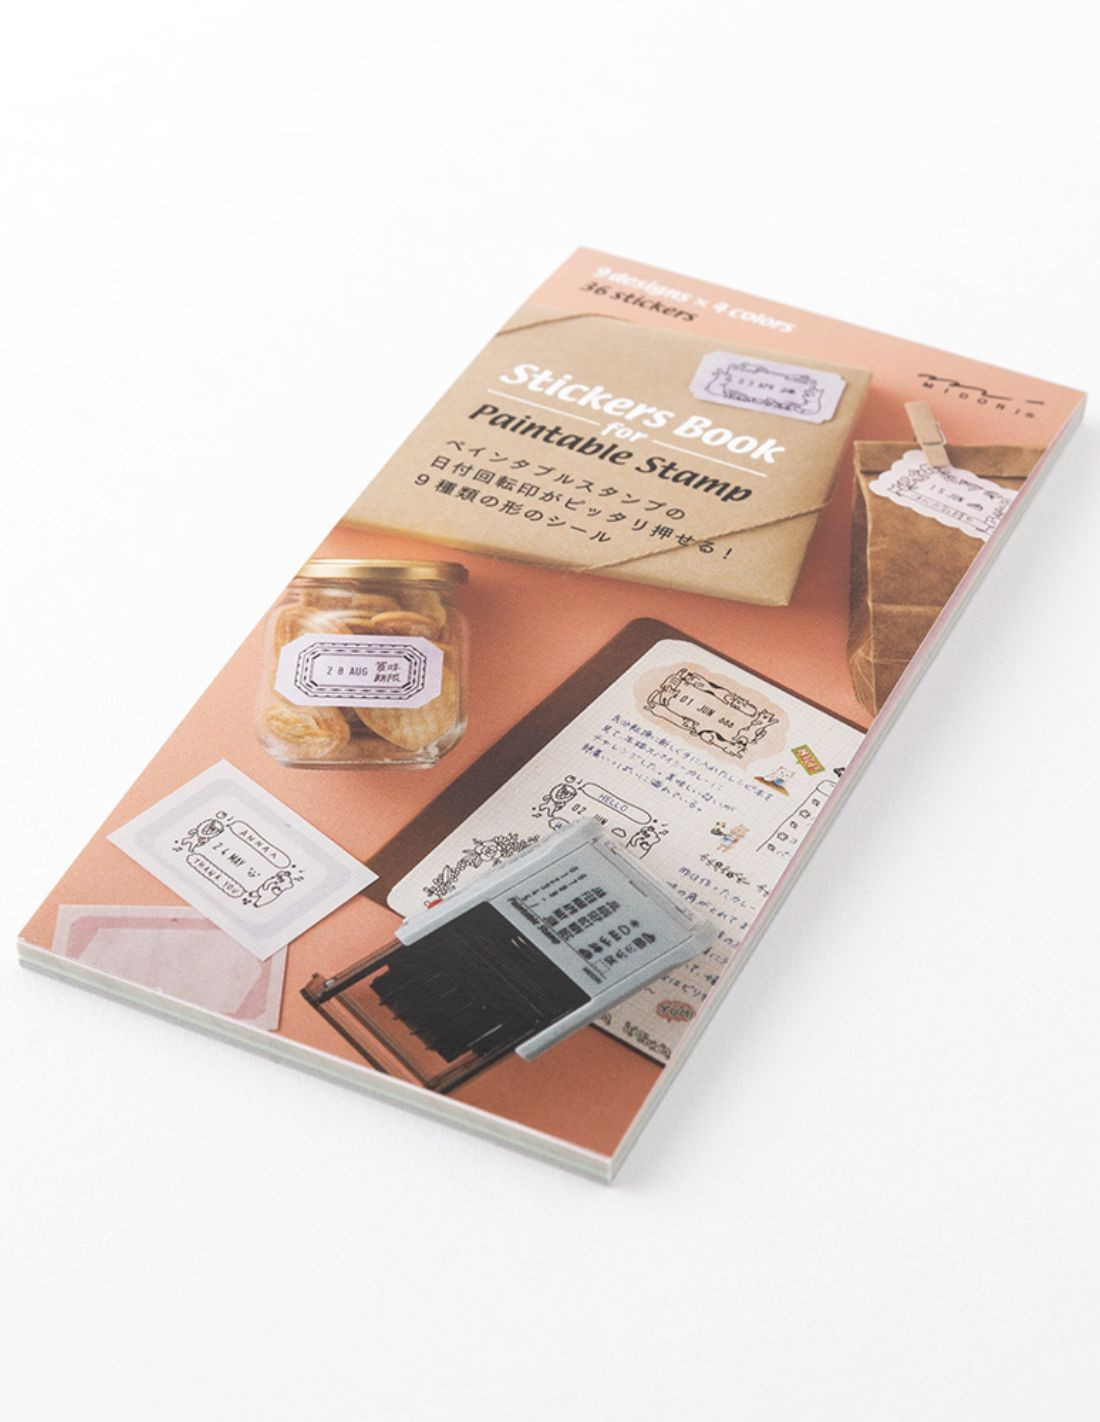 Midori Paintable Stamp - Stickers Book Natural Color